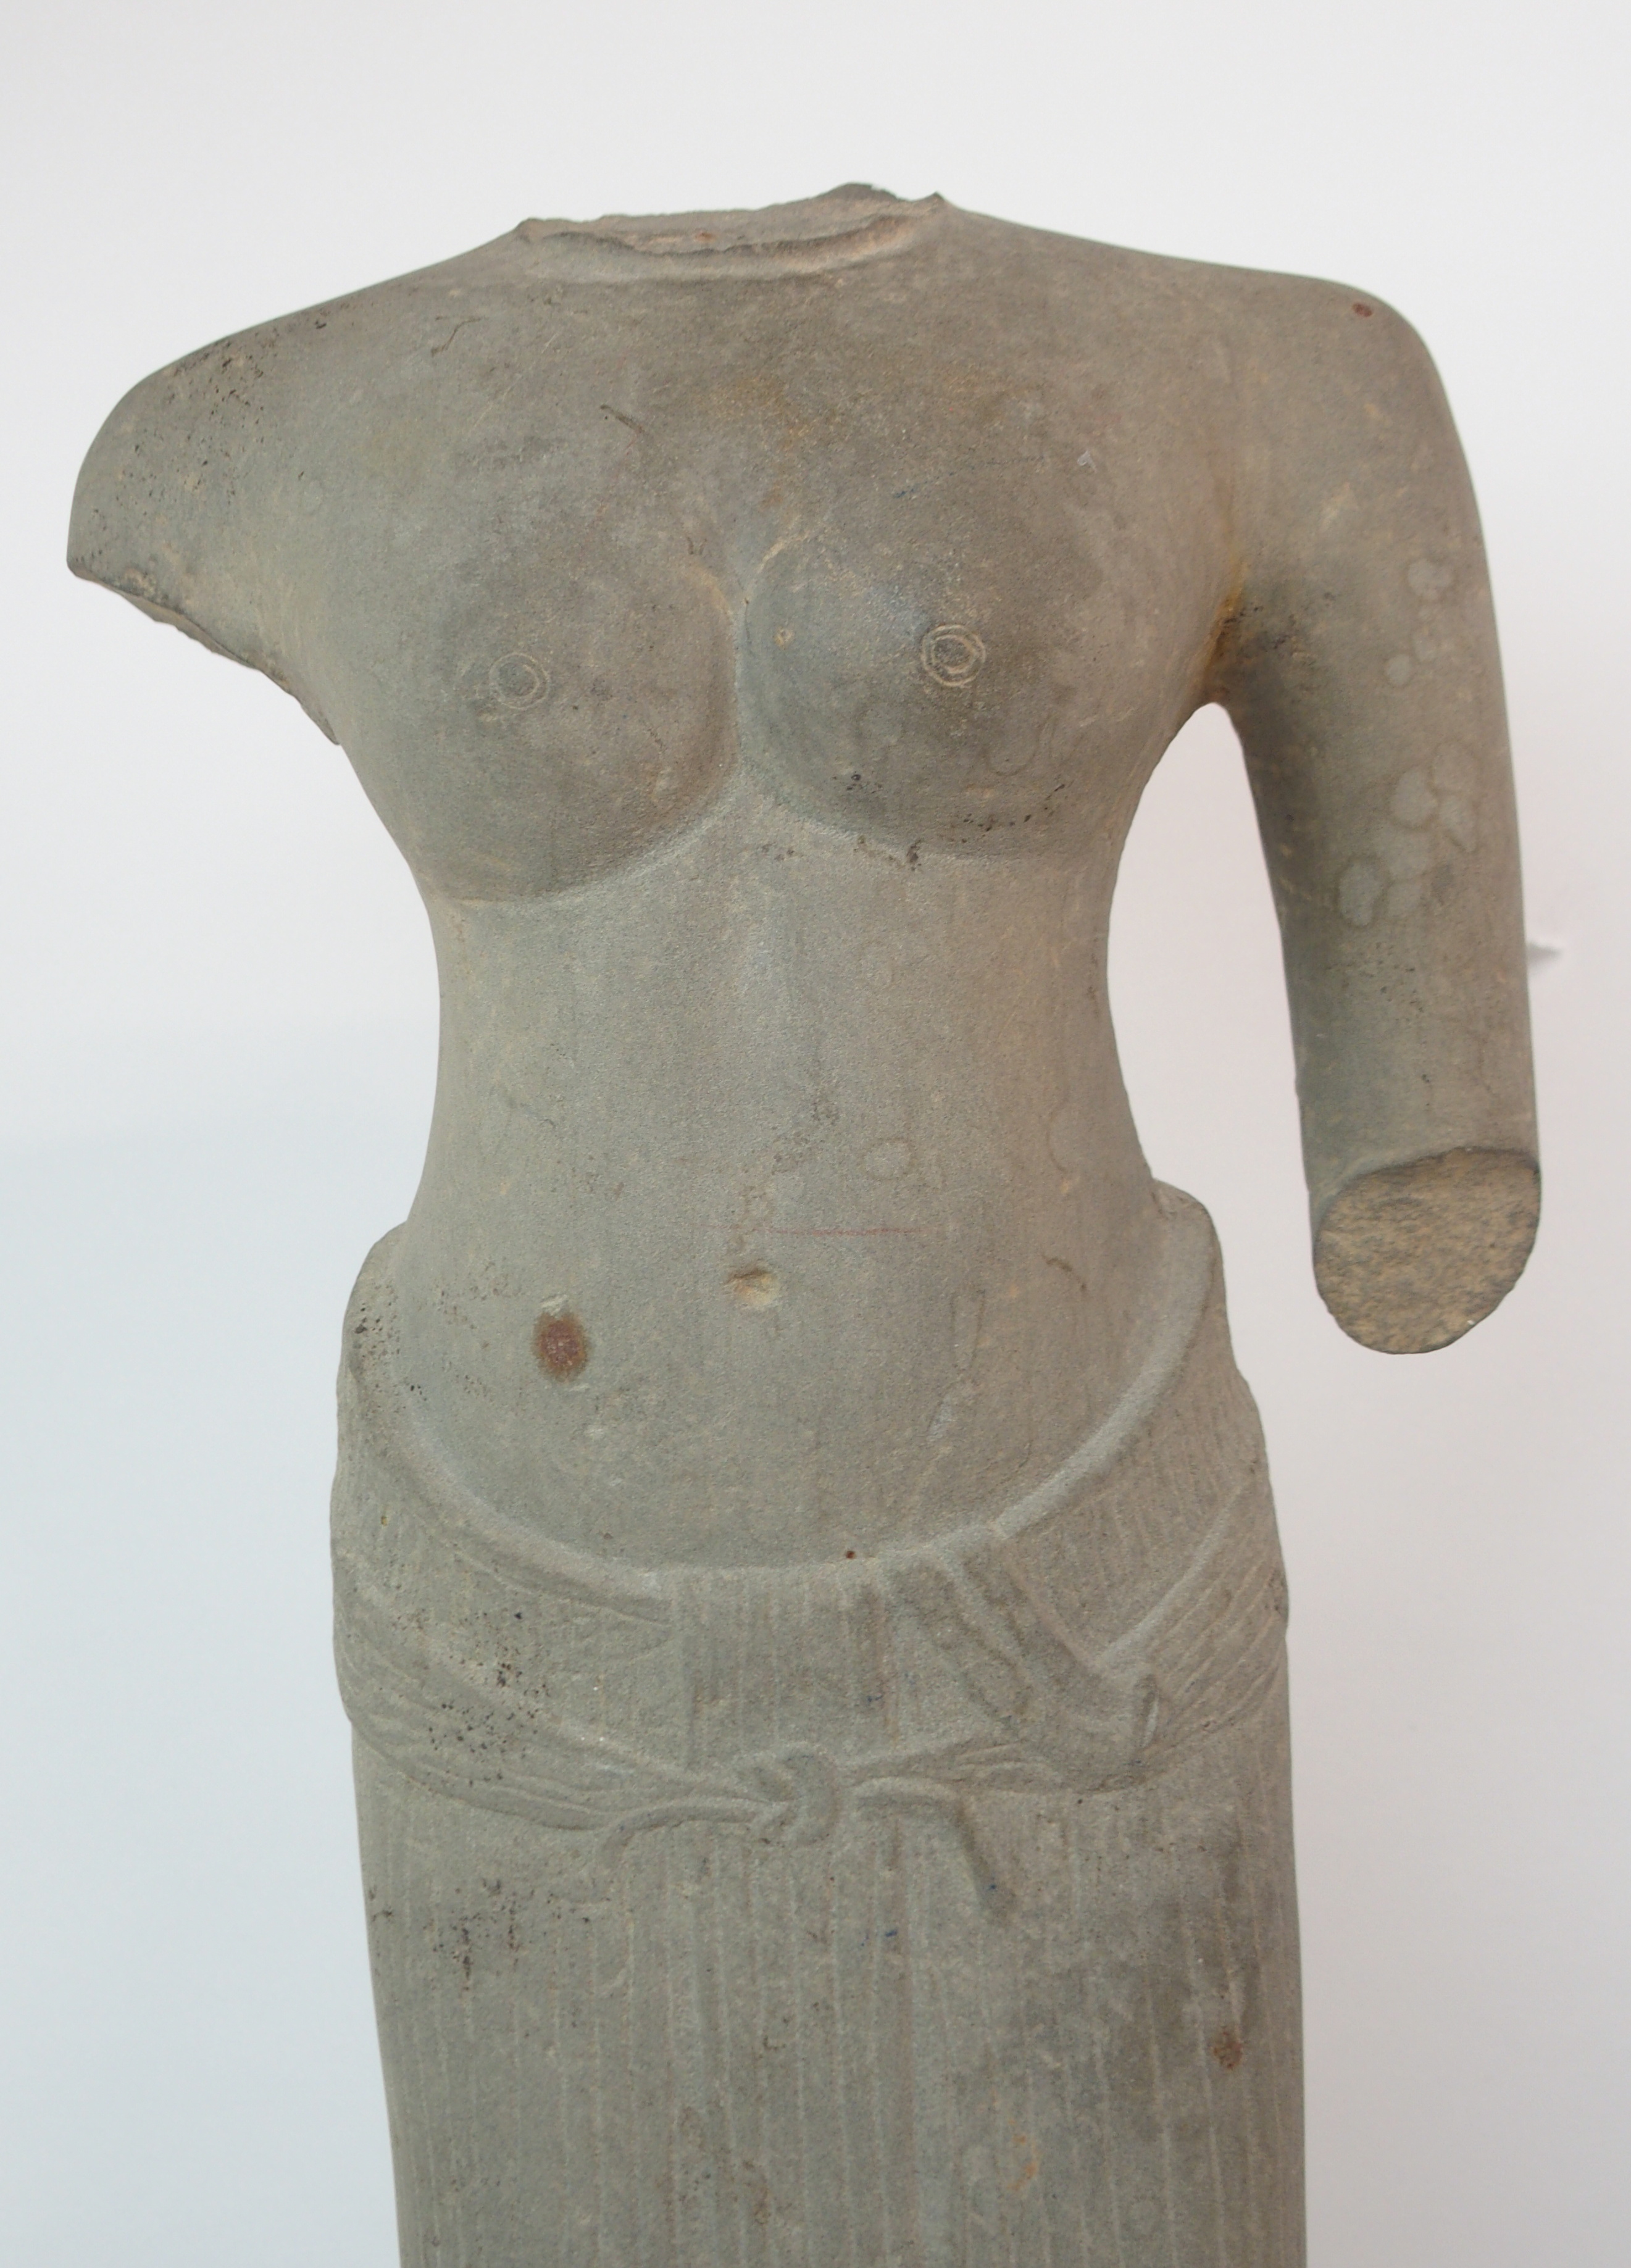 AN ASIAN STONE CARVING OF A FEMALE TORSO bare chested and wearing a ribbon tied patterned dress, ( - Image 2 of 10